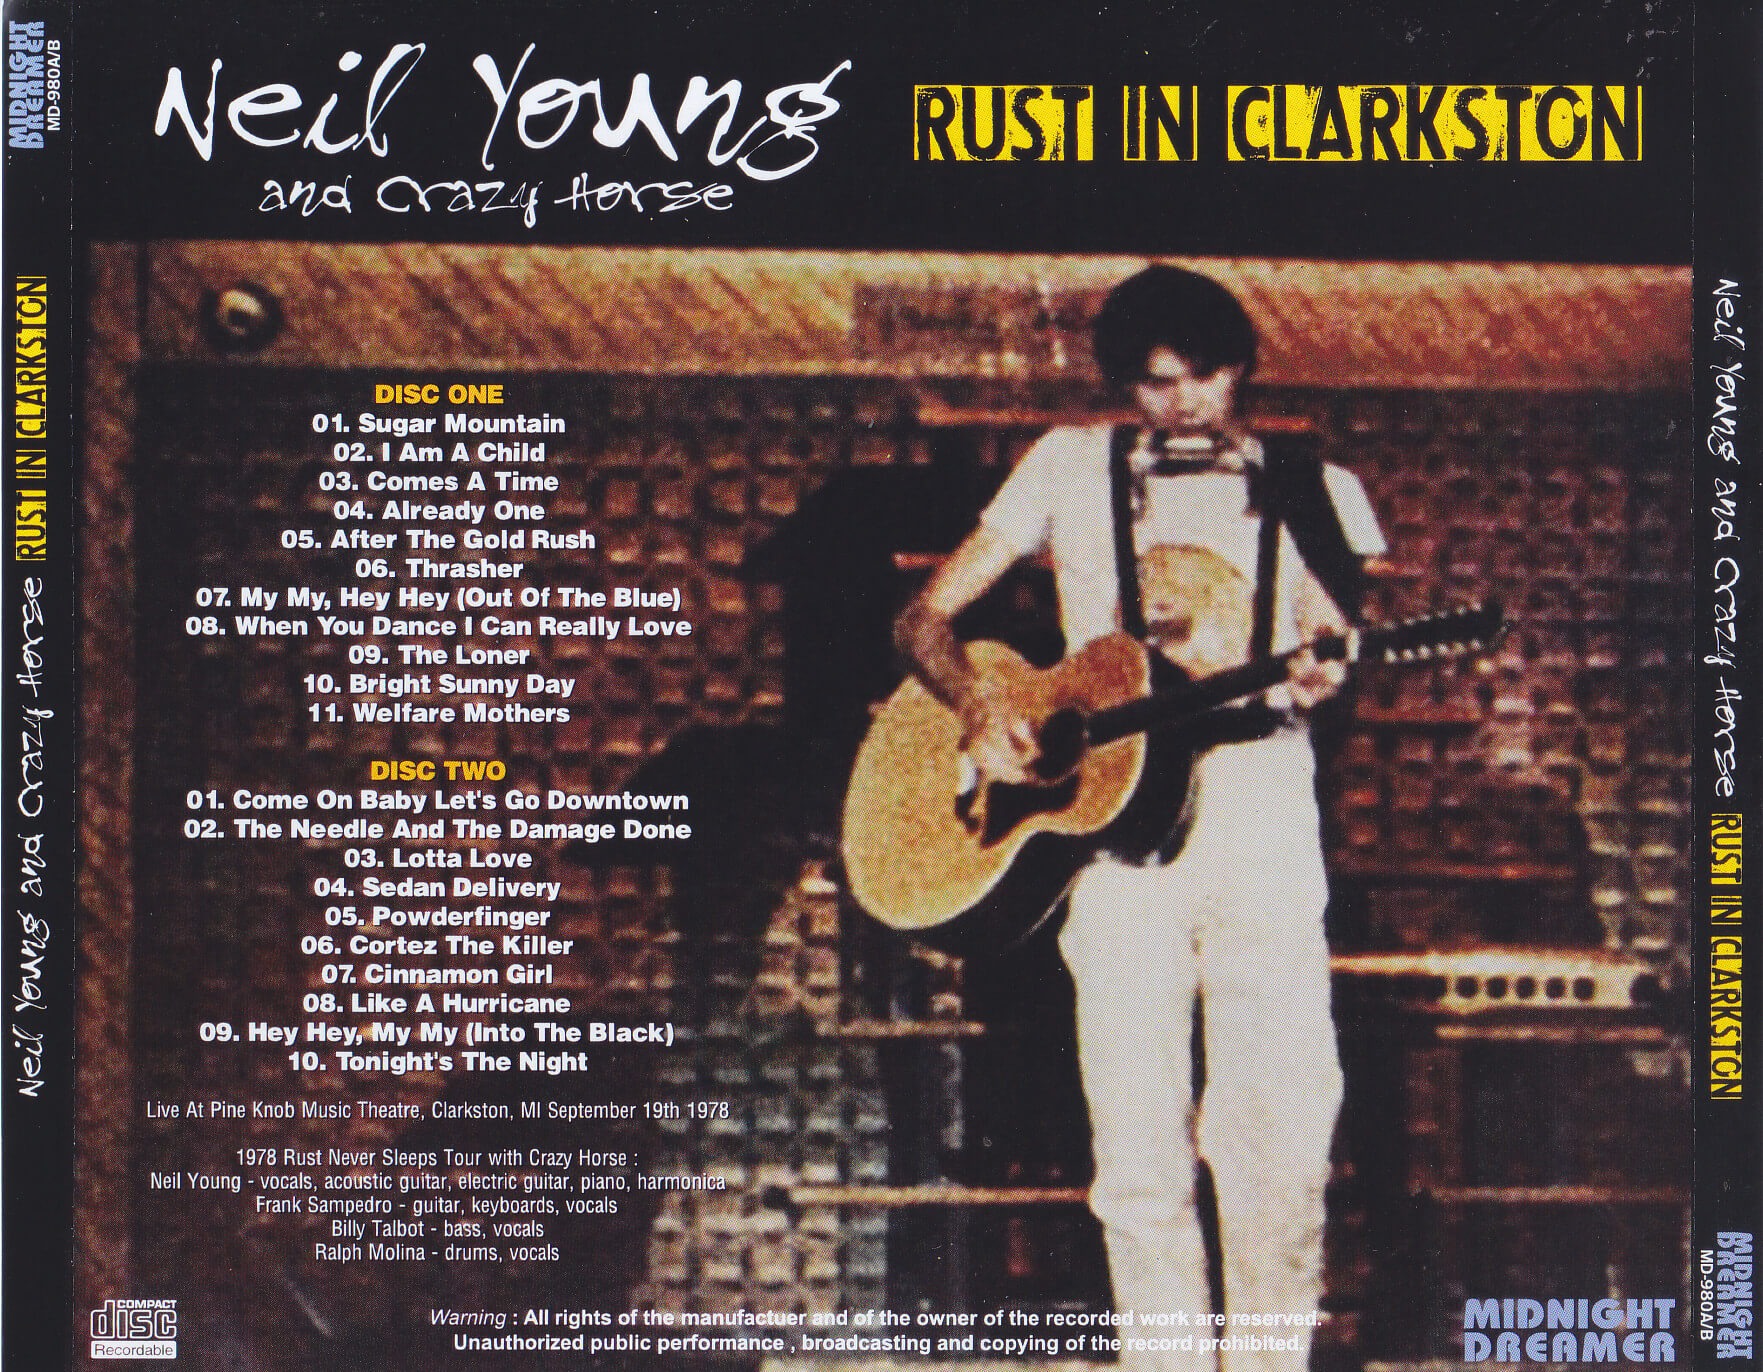 Neil Young And Crazy Horse / Rust In Clarkson / 2CDR – GiGinJapan